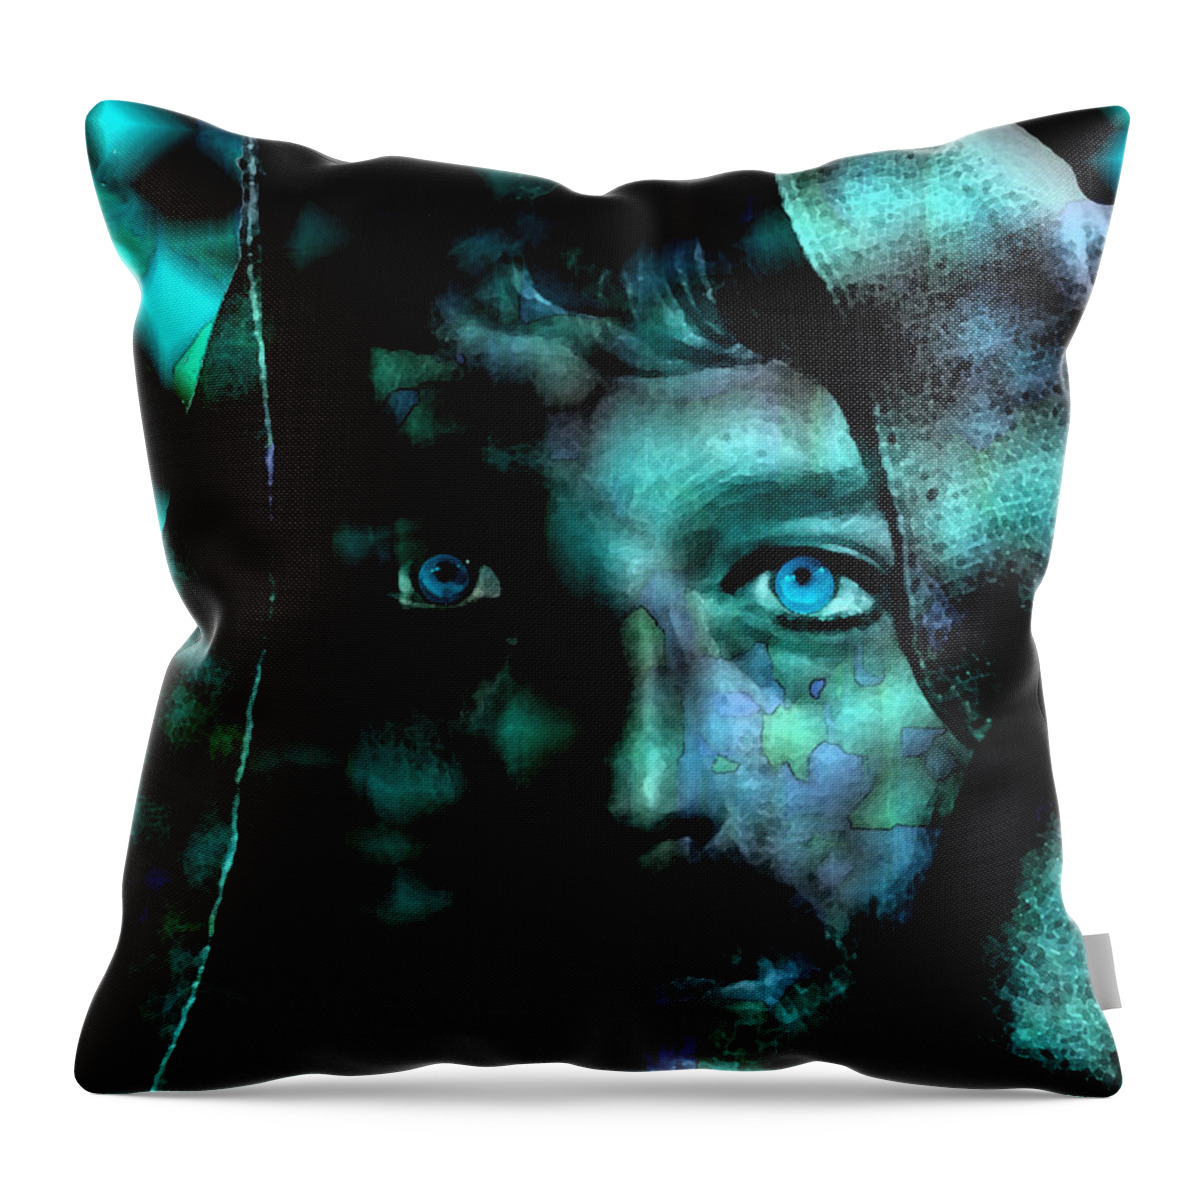 In The Garden Throw Pillow featuring the digital art In The Garden by Seth Weaver